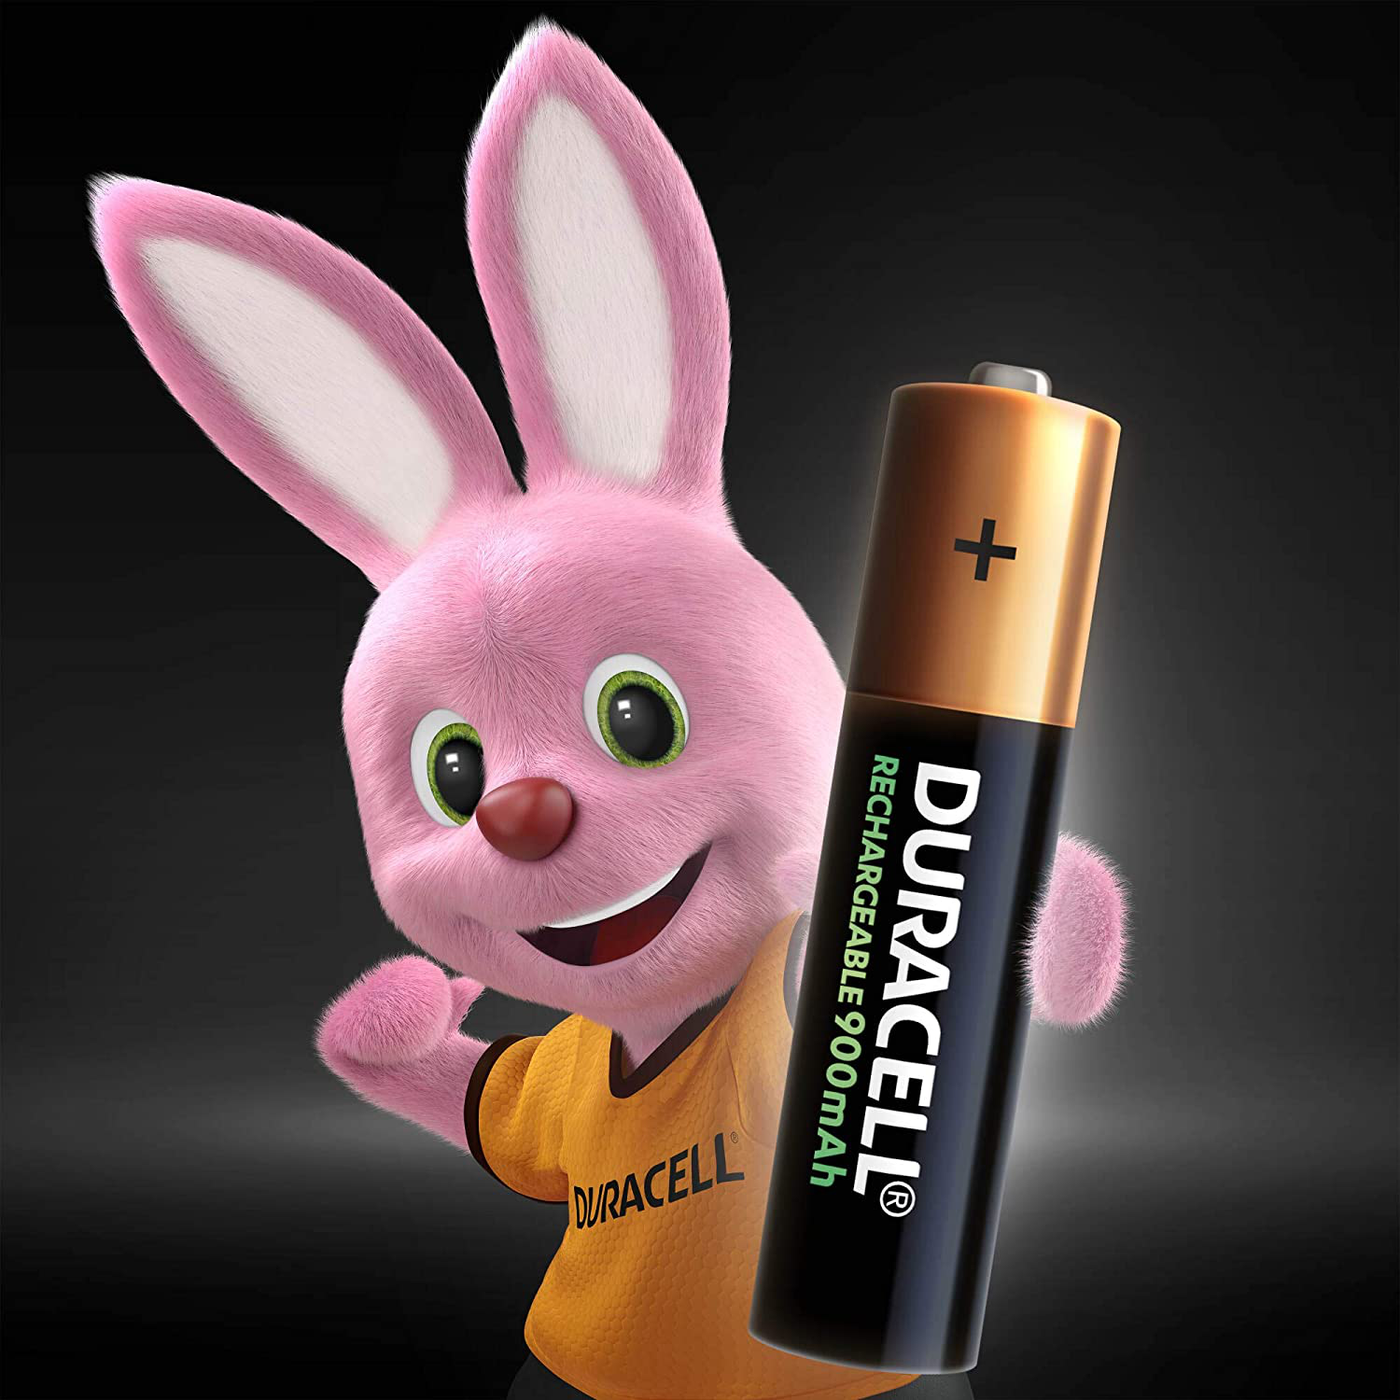 Duracell - Rechargeable AAA Batteries - long lasting, all-purpose Double A battery for household and business - 2 count